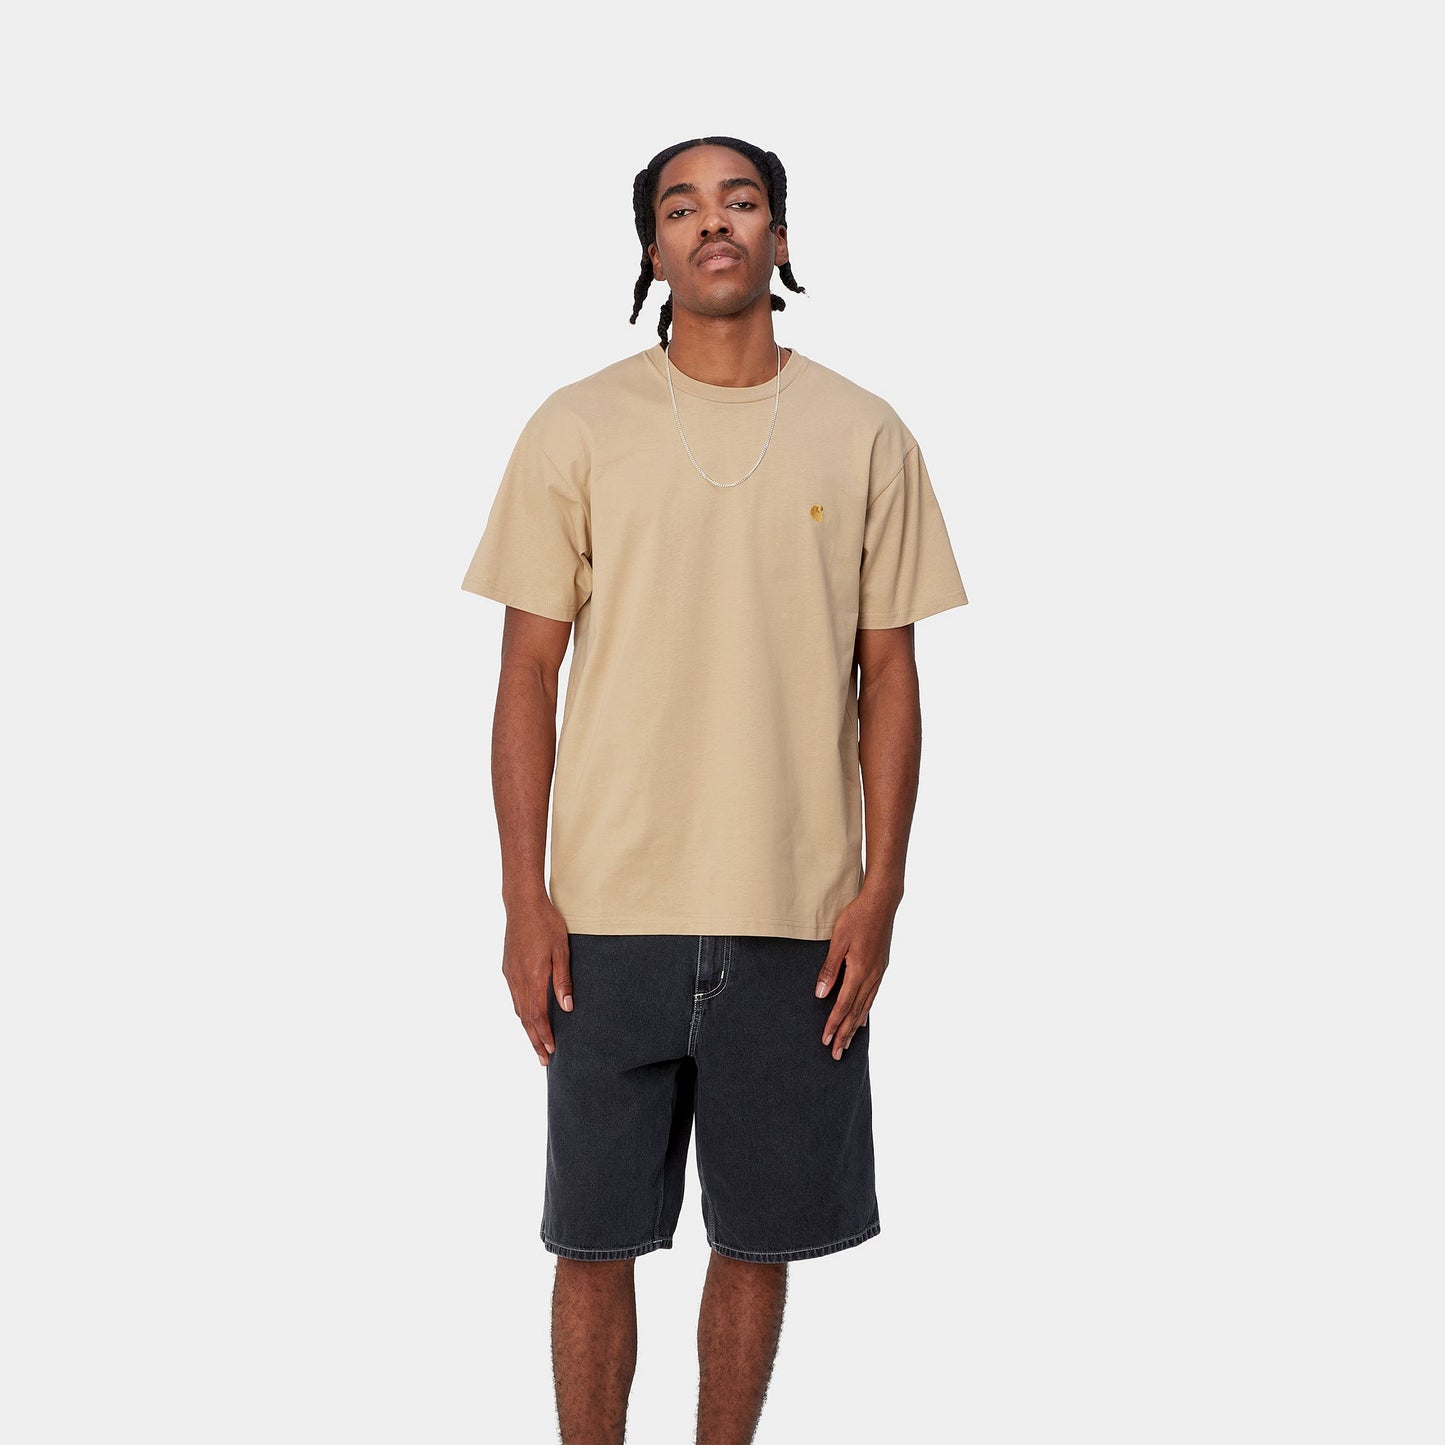 CARHARTT WIP S/S CHASE T-Shirt - Sable Gold